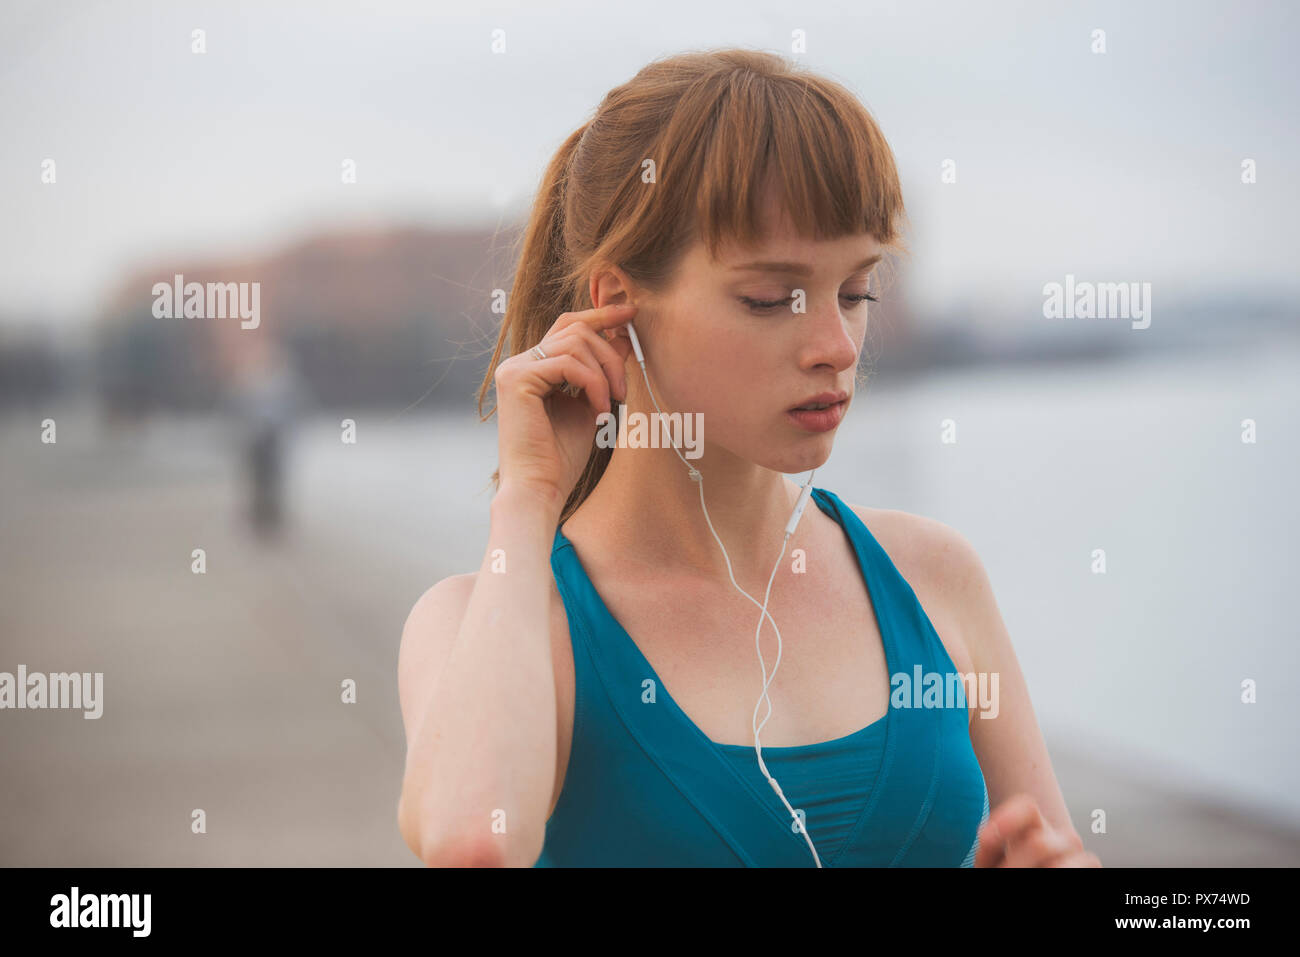 a woman athlete, running by the city seaside, putting on her earphones Stock Photo